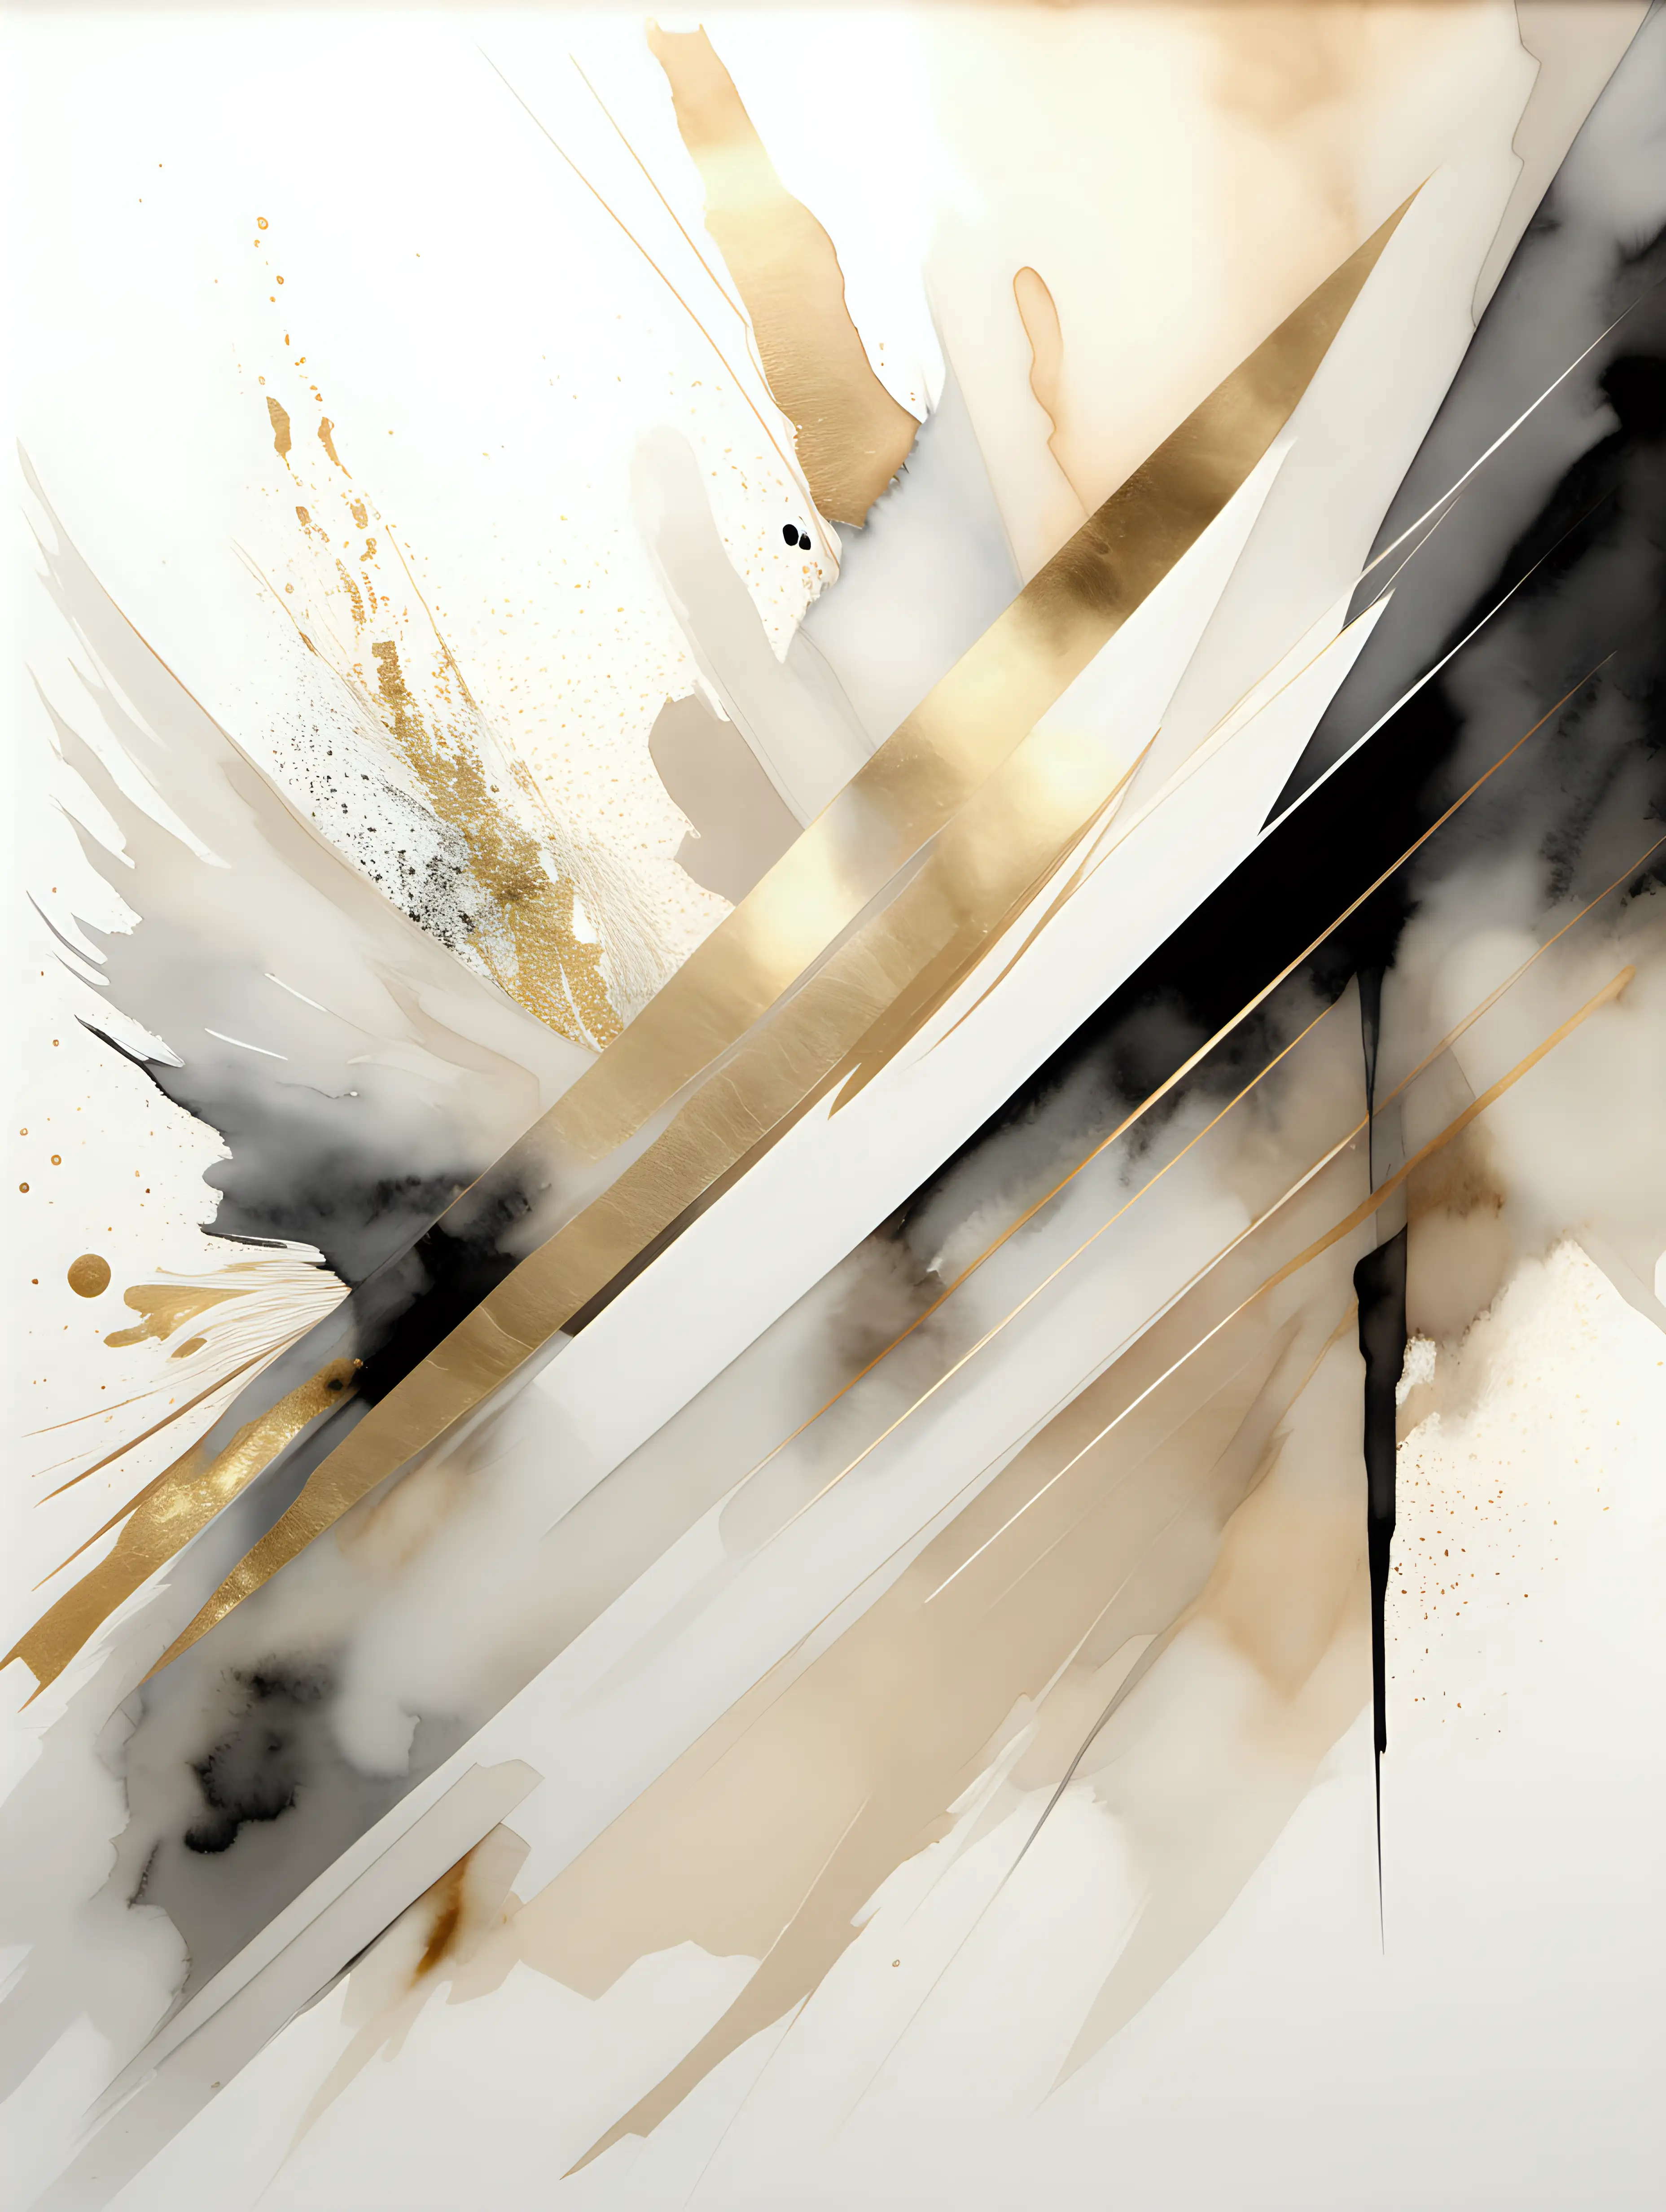 Contemporary Abstract Art Dynamic Diagonal Patterns in Light Watercolors with White Beige Gold and Black Tones